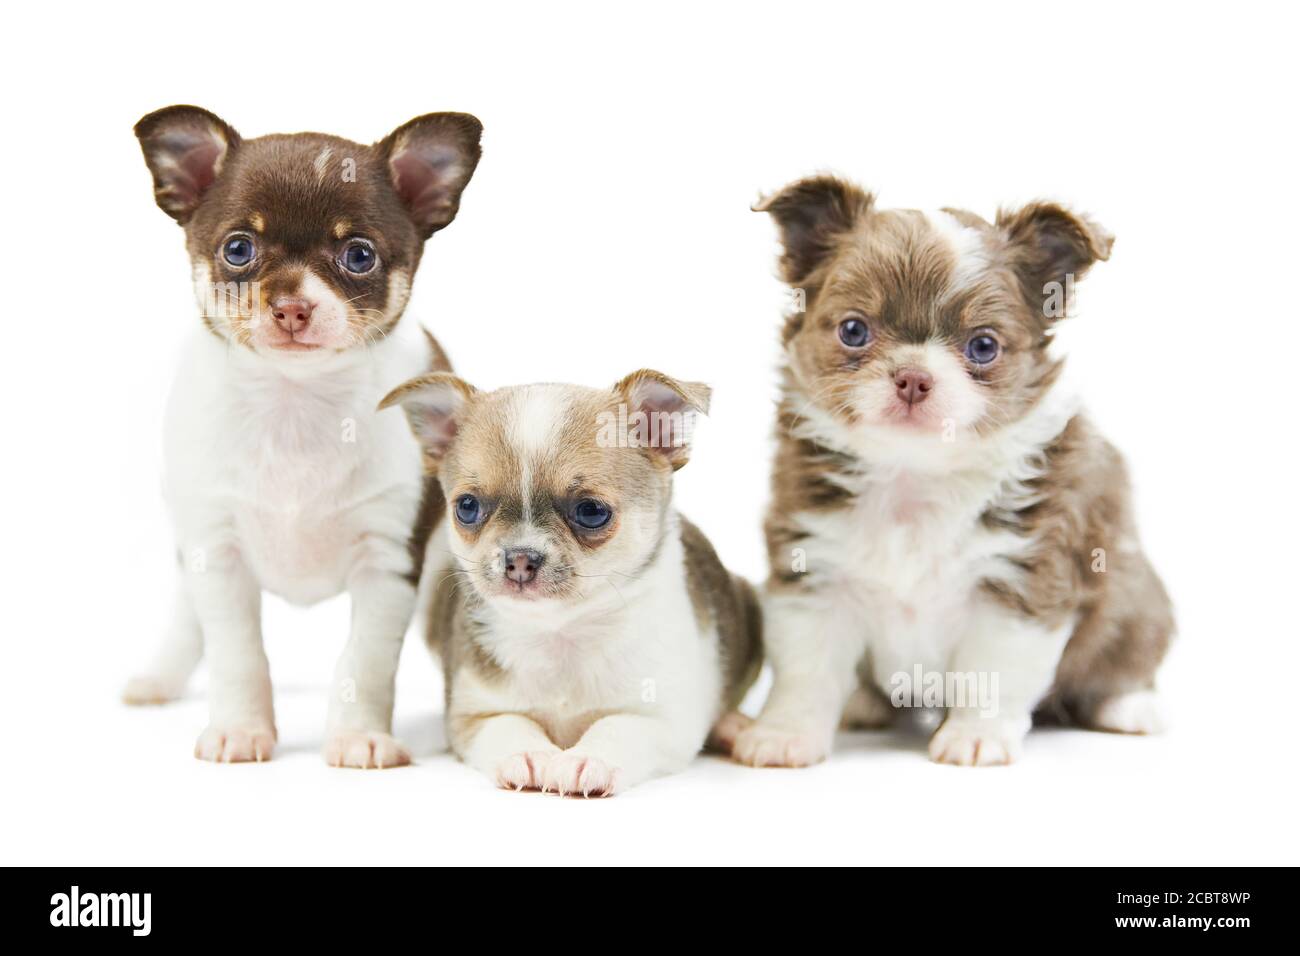 Three Chihuahua puppies, isolated. Little cute dogs on white background. Small short haired chihuahua dog breed, studio shoot. Stock Photo